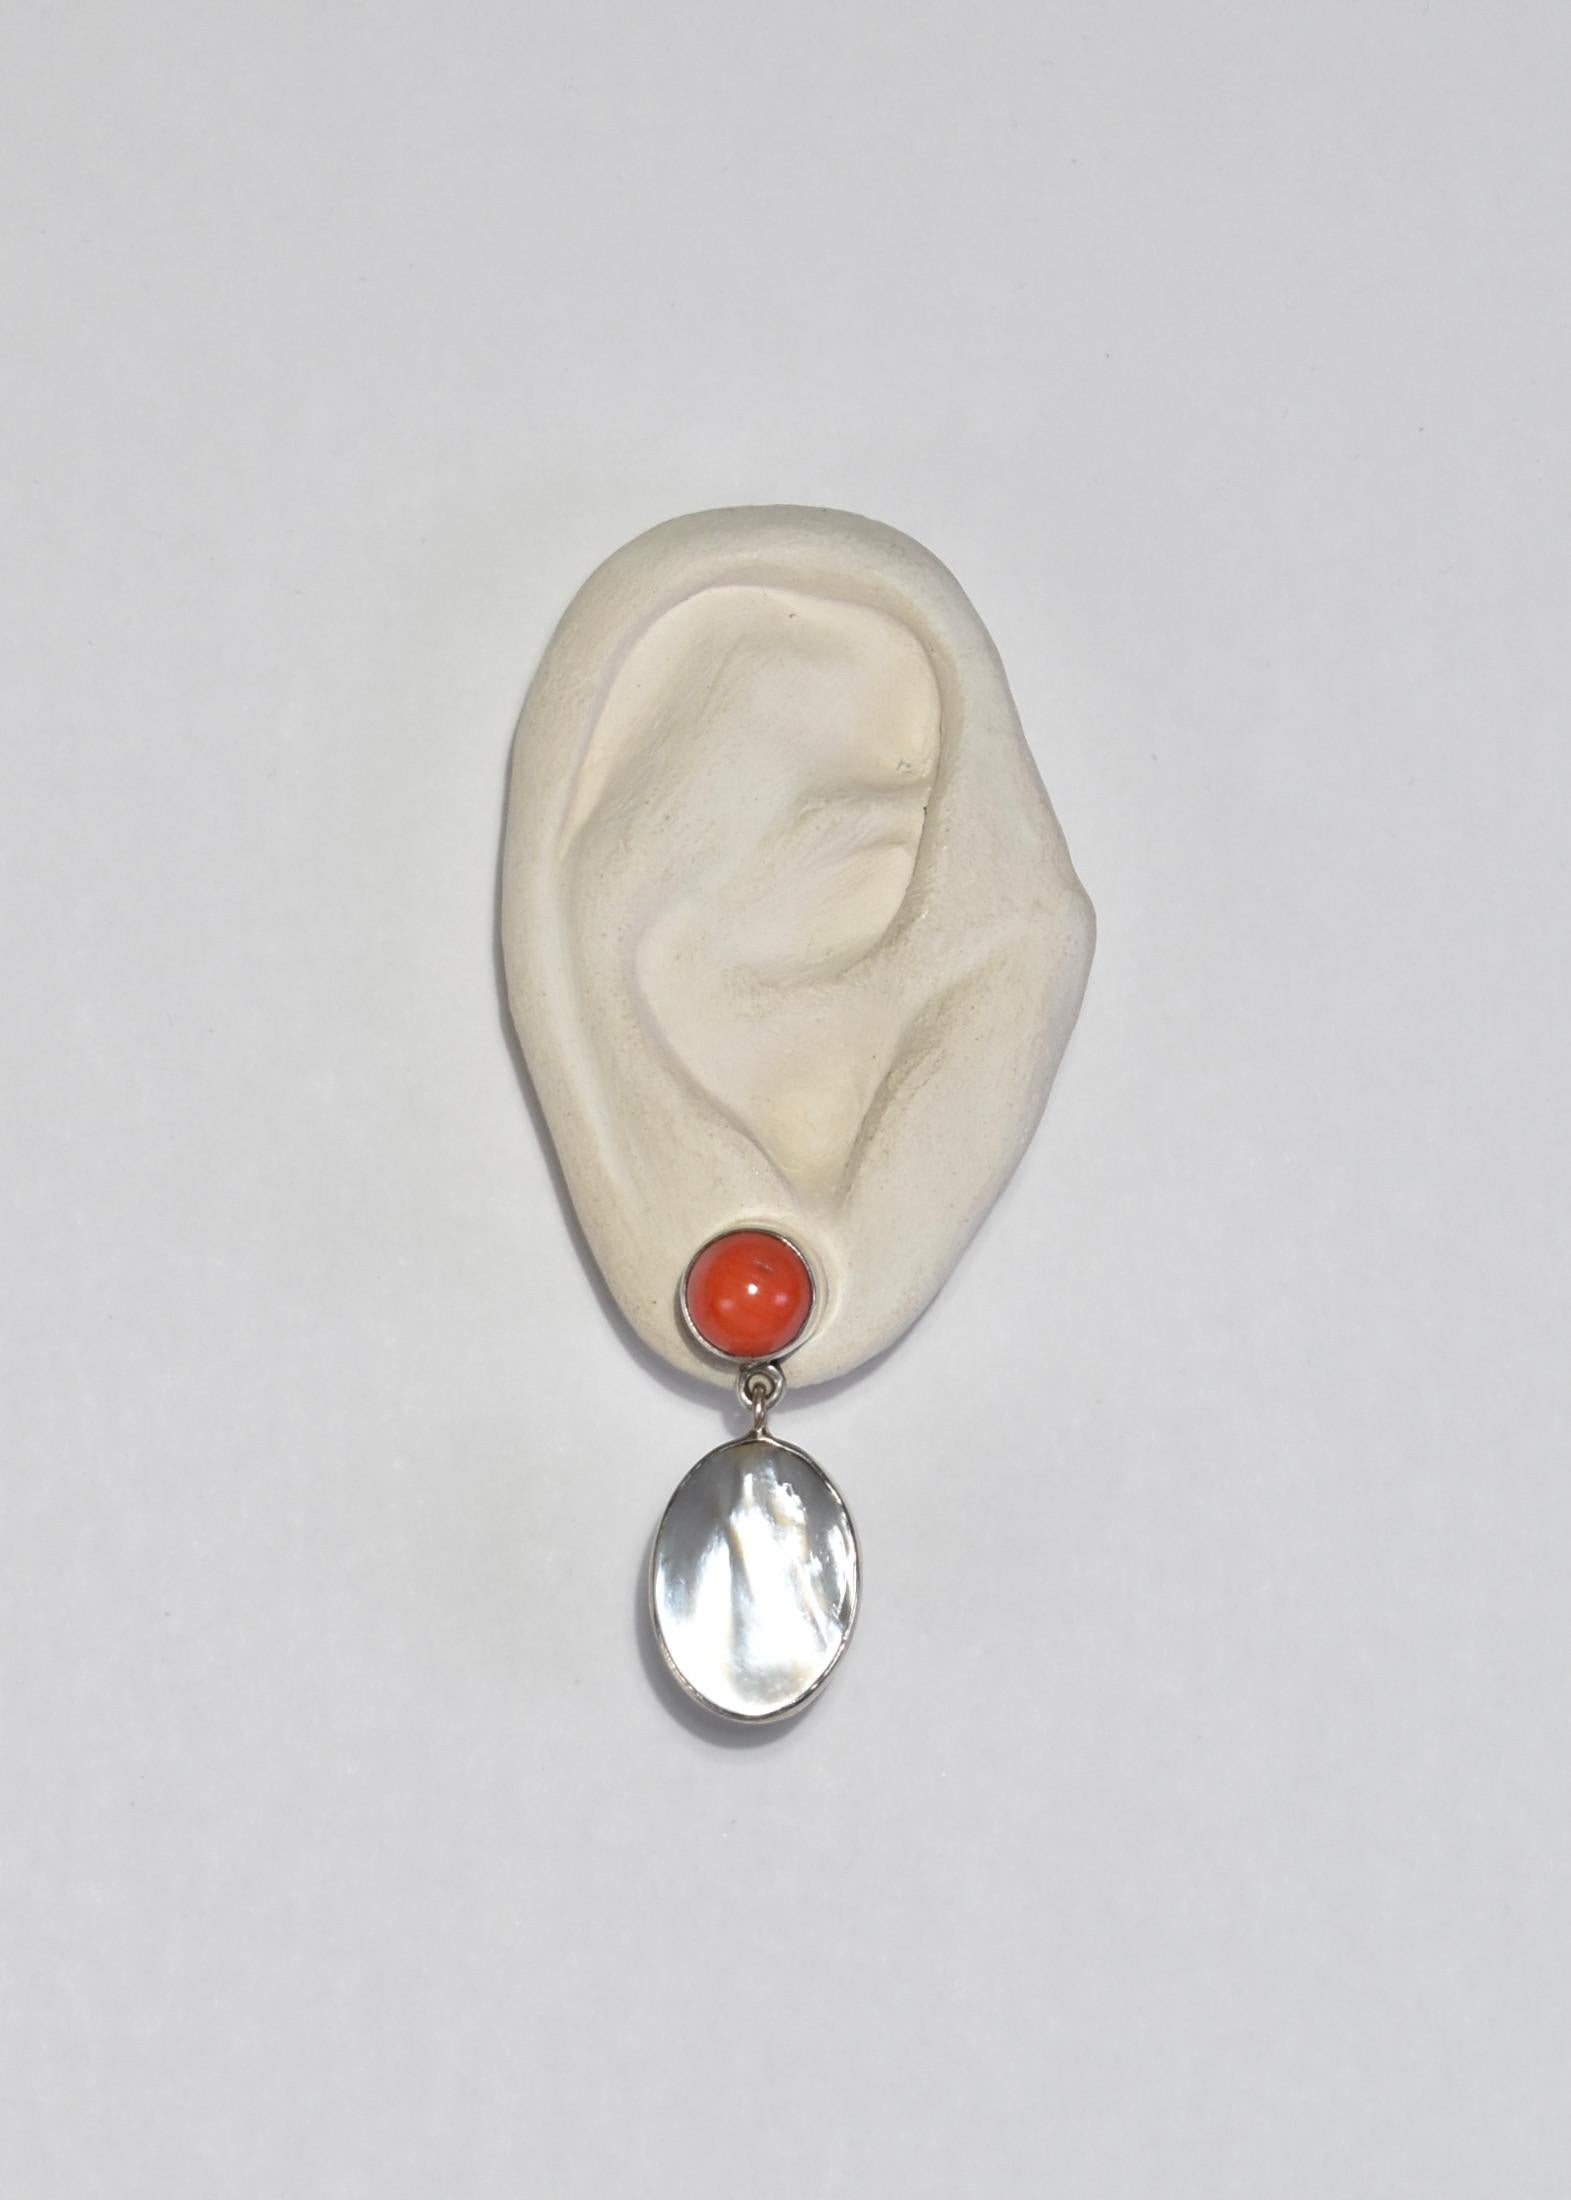 Stunning vintage earrings with coral and mother of pearl detail, pierced. Stamped 925.

Material: Sterling silver, mother of pearl, coral.